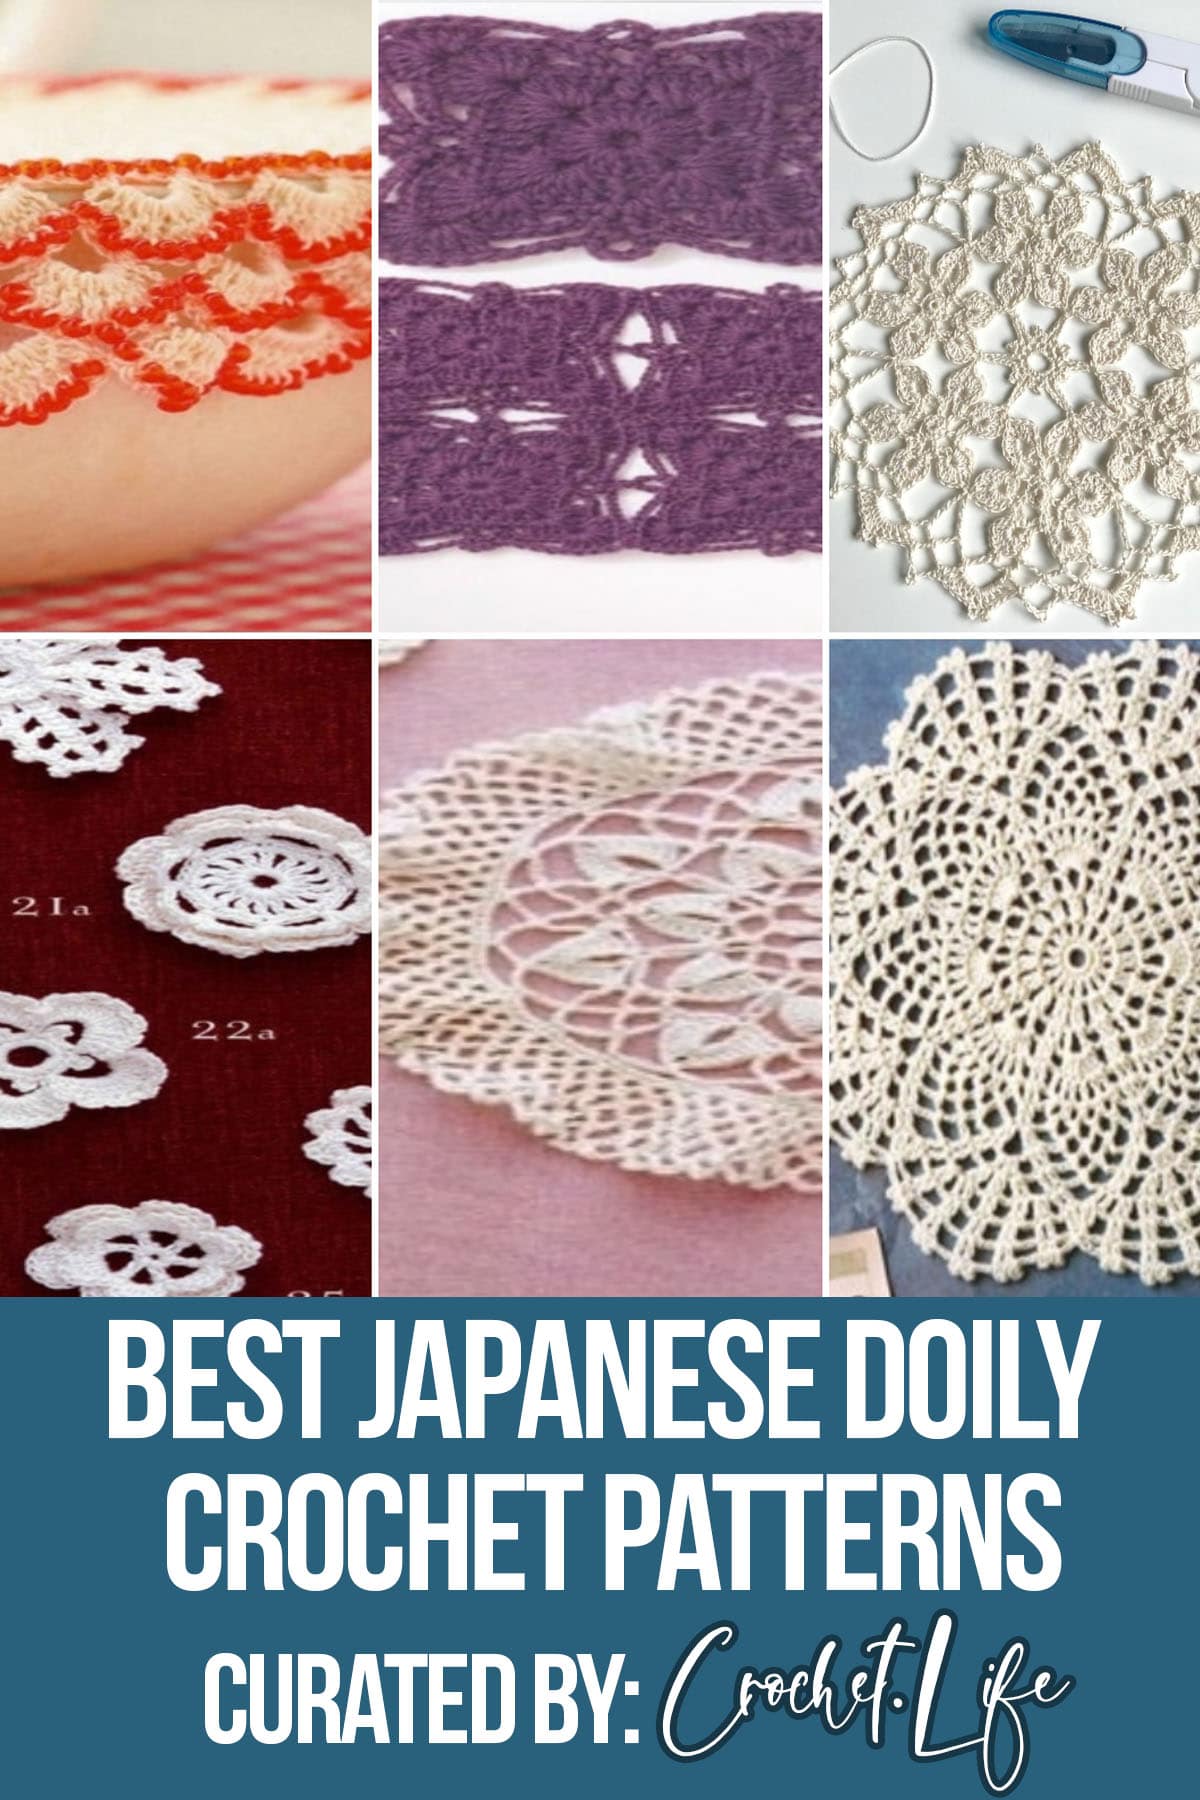 photo collage of japanese crochet patterns for doilies with text which reads best japanese doily crochet patterns curated by crochet.life